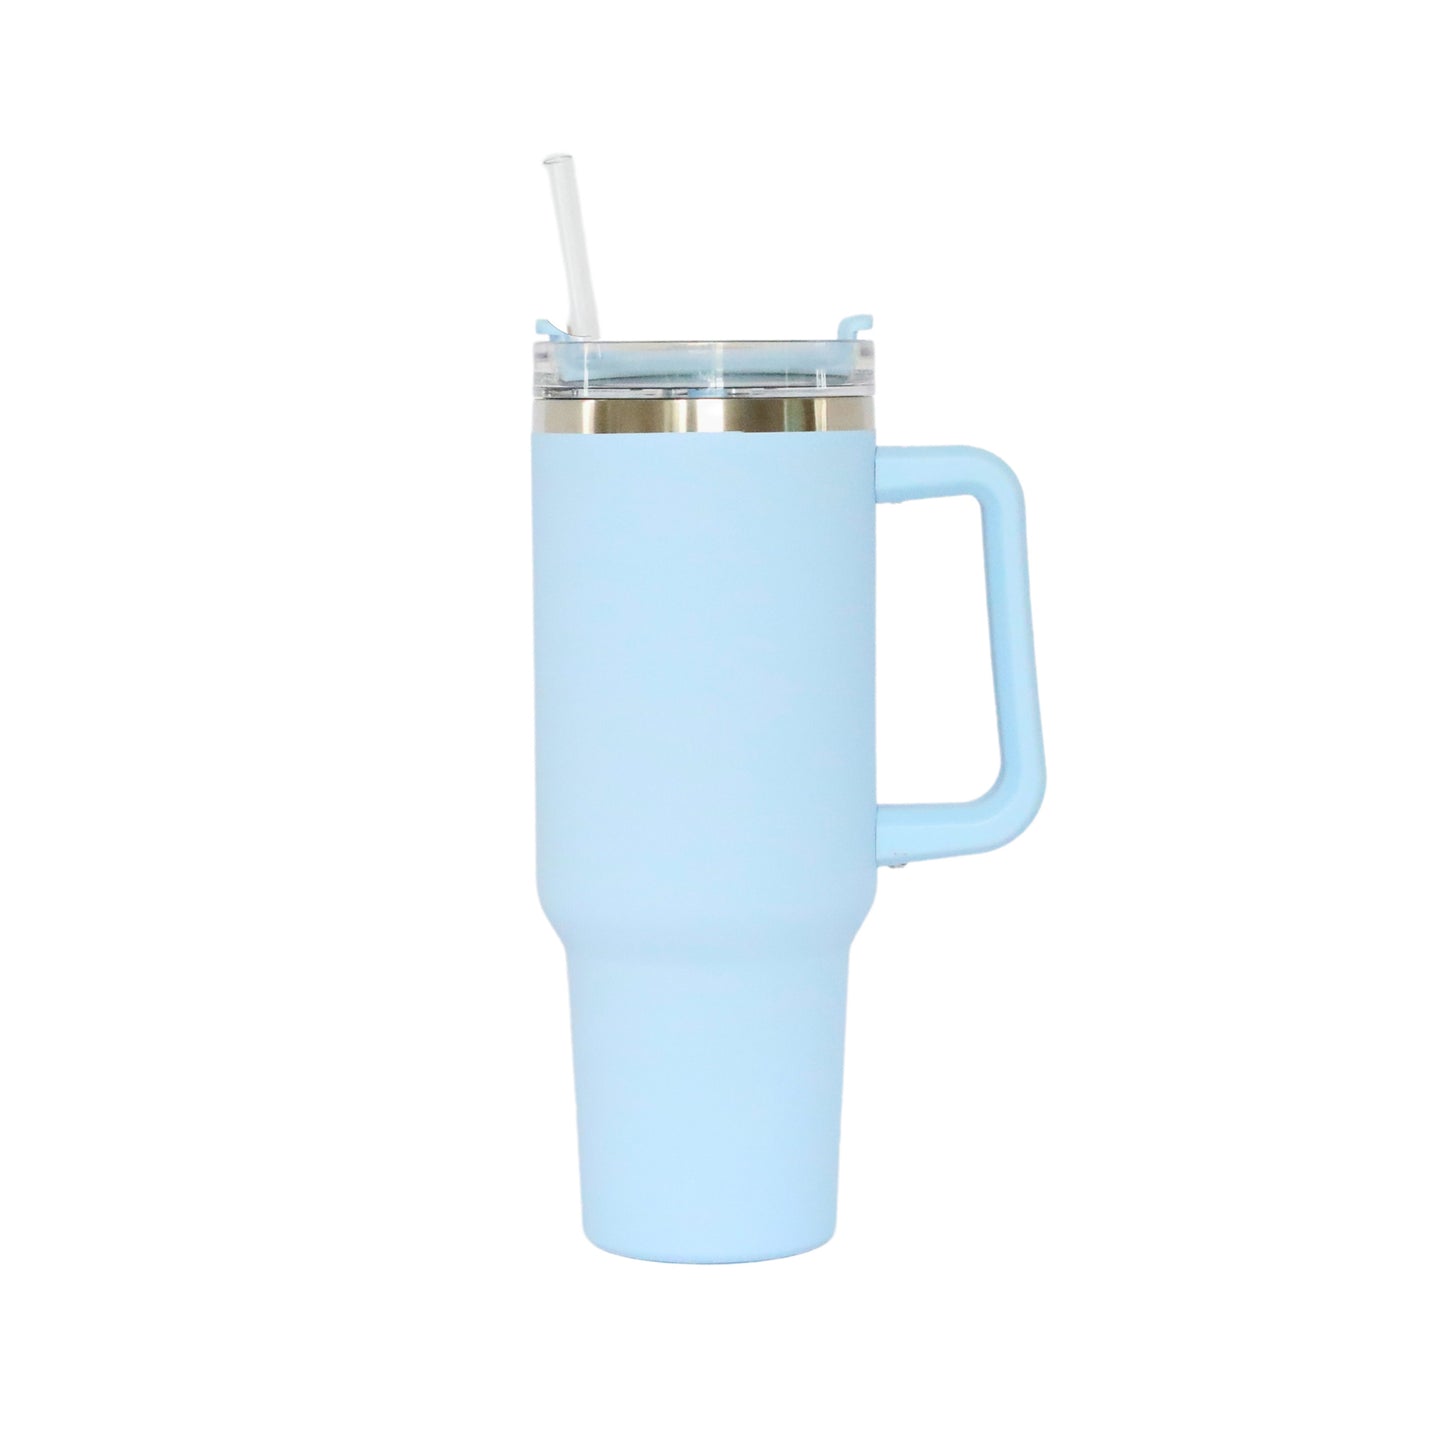 40 Oz Stainless Steel Tumbler with Handle & Straw - Light Blue